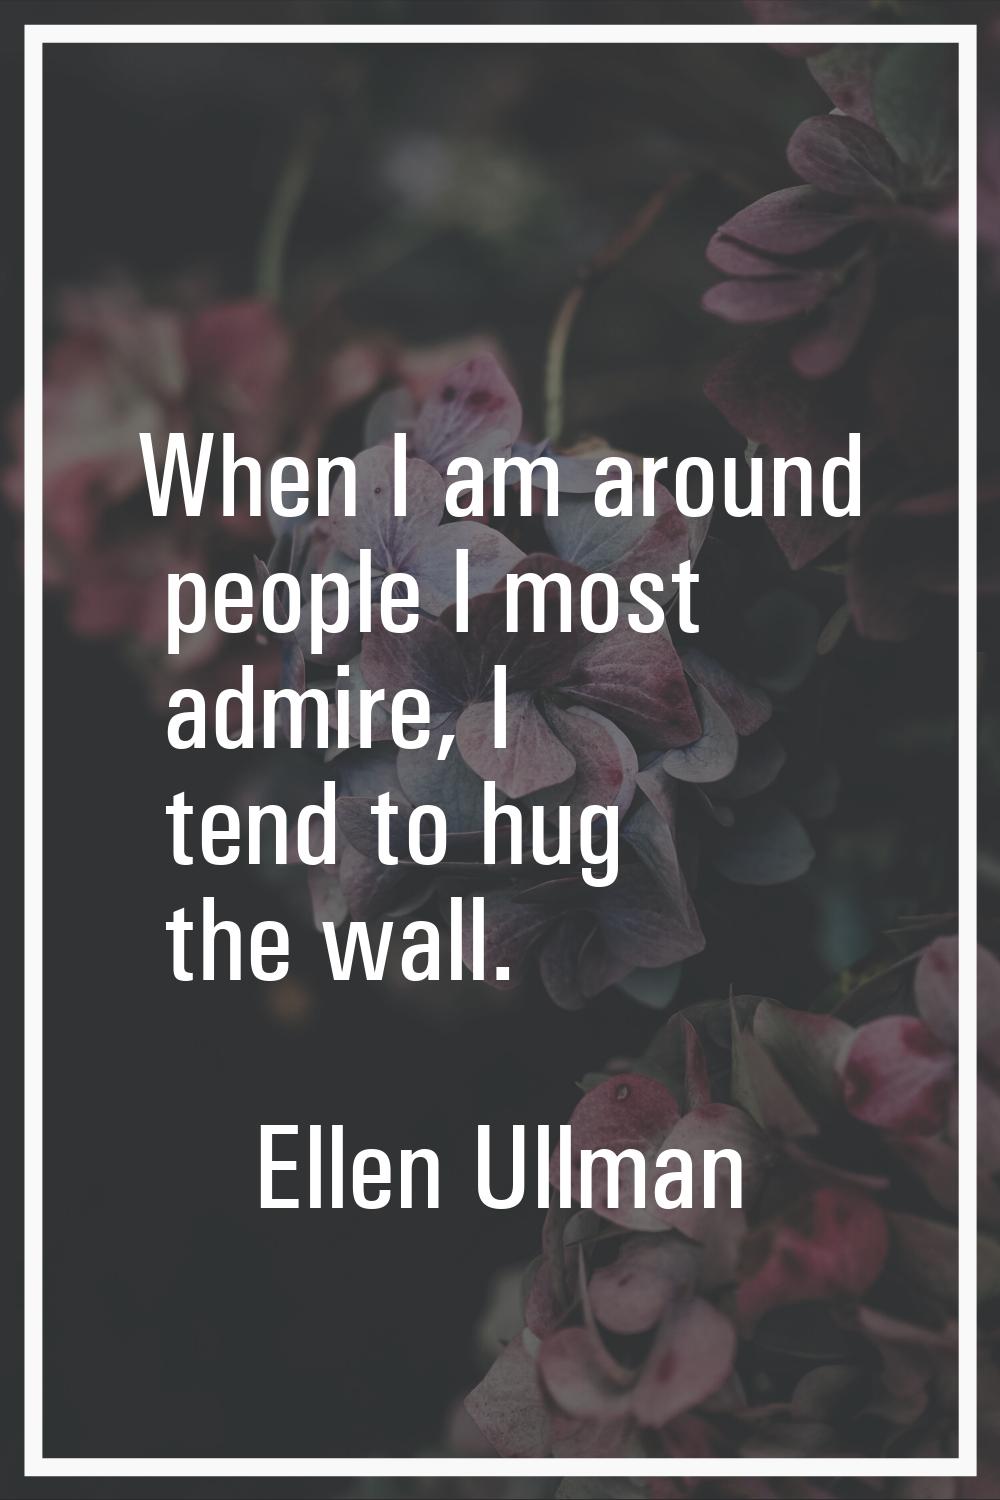 When I am around people I most admire, I tend to hug the wall.